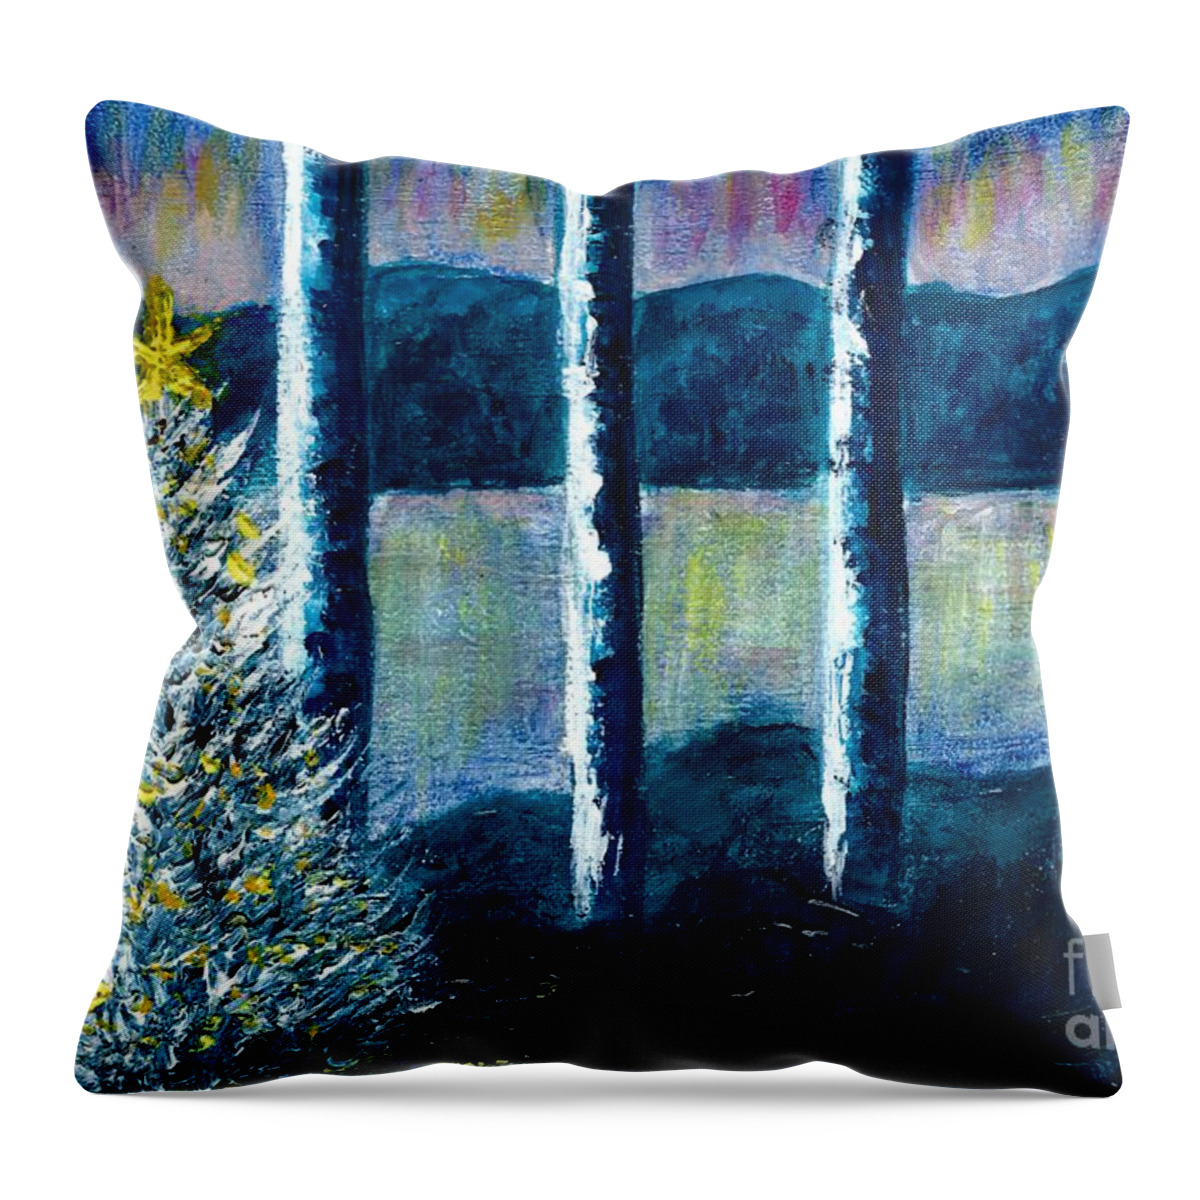 #christmas #trees #christmastrees #forests #lakes #holidays #seasonal Throw Pillow featuring the painting Enlightened Forest by Allison Constantino